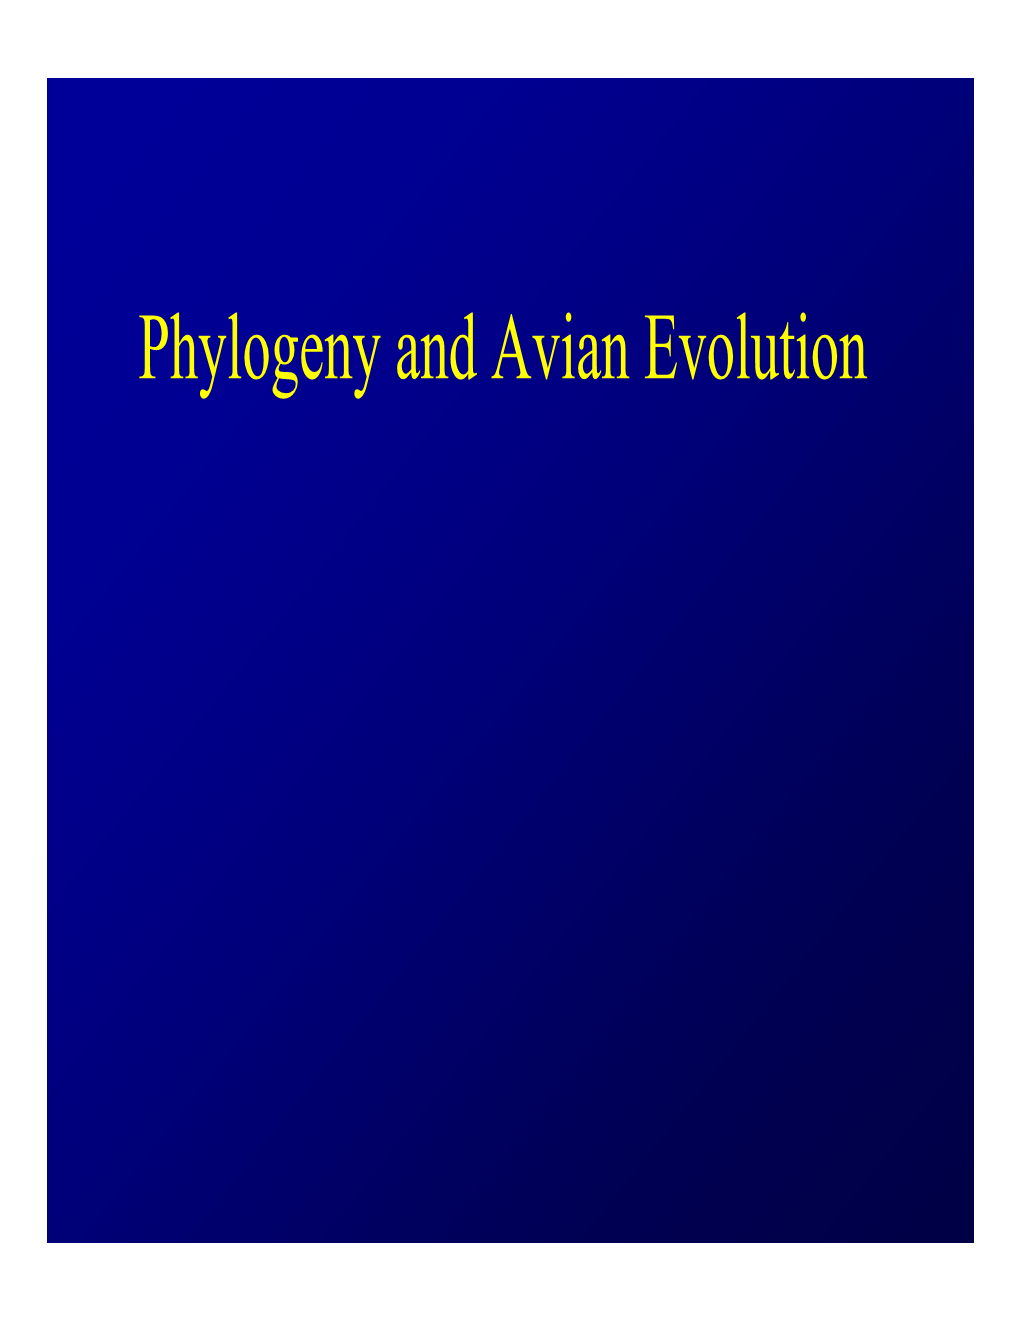 Phylogeny and Avian Evolution Phylogeny and Evolution of the Aves